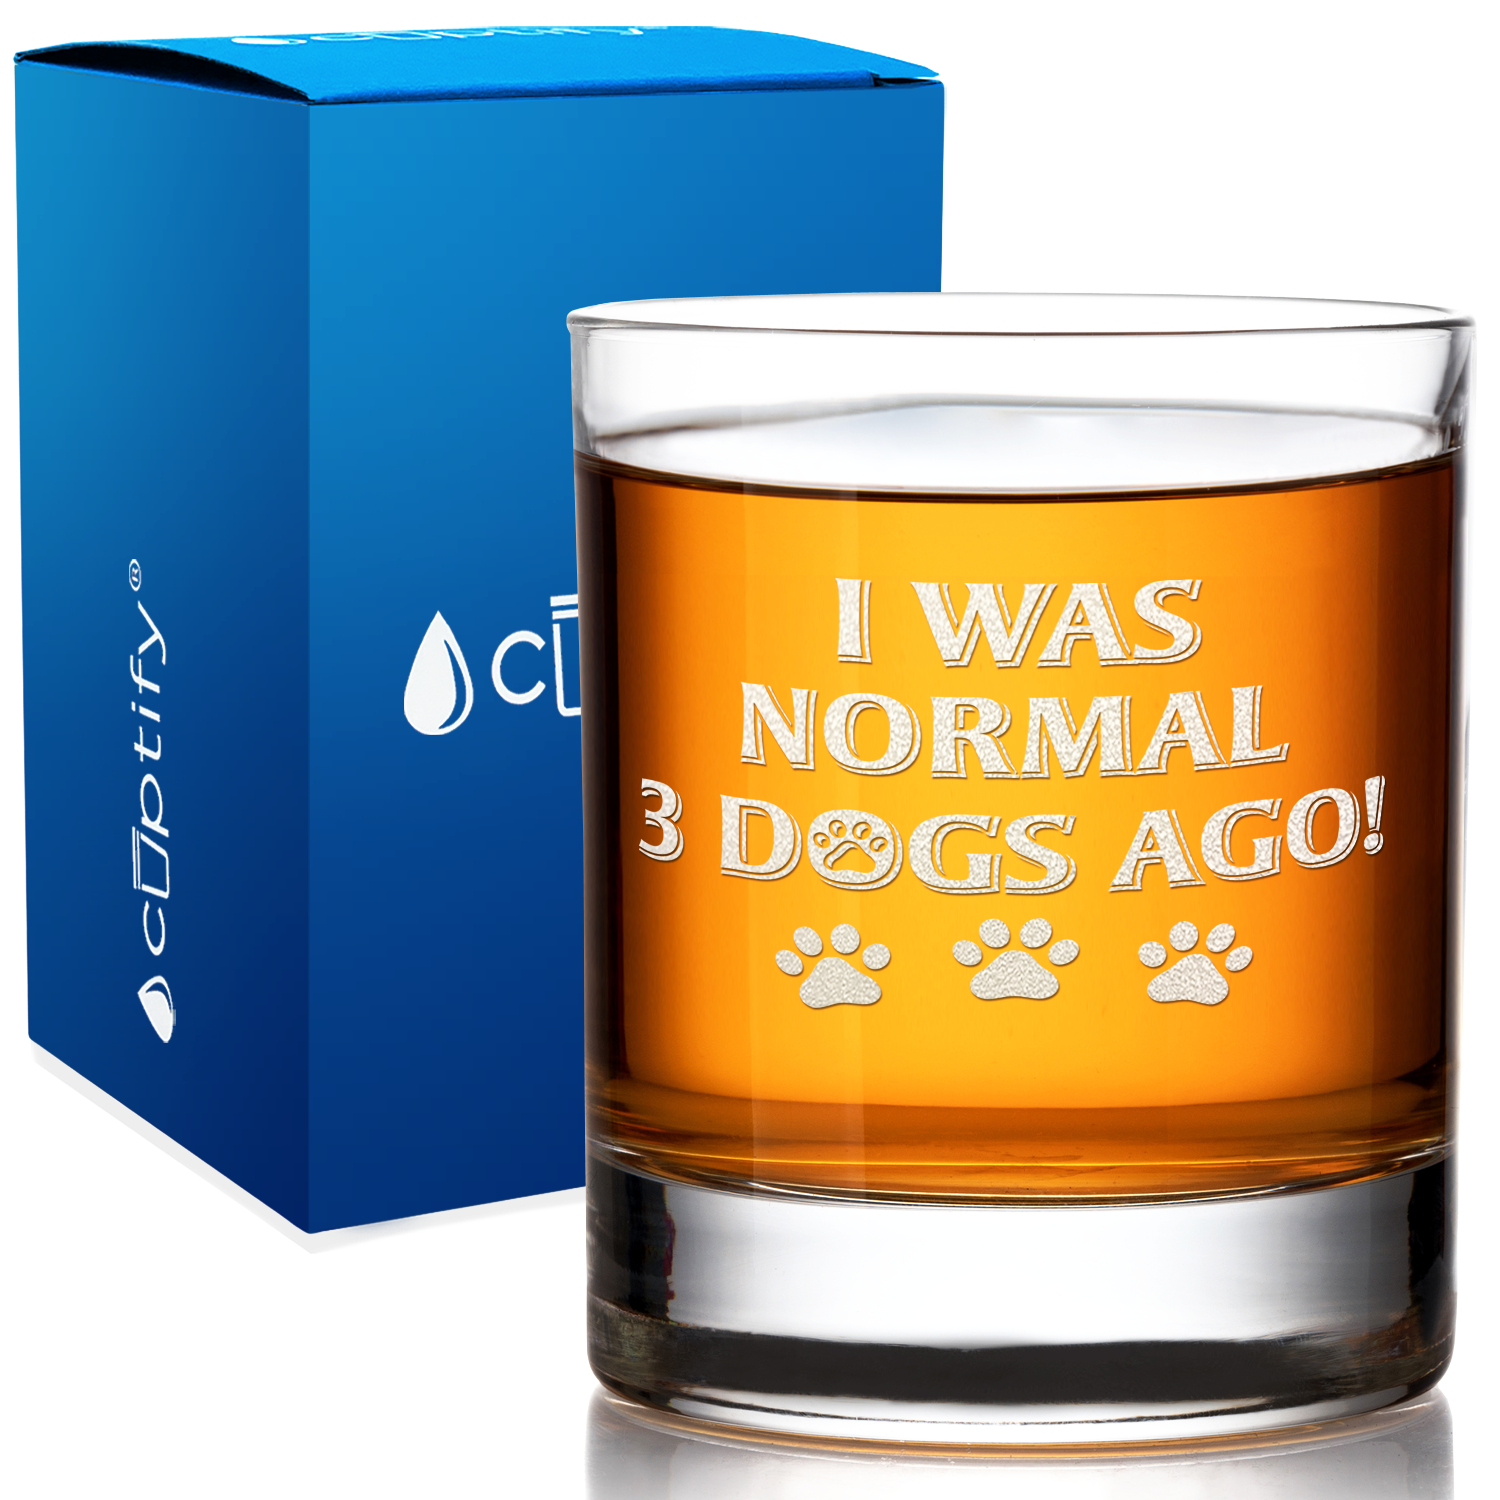 I was Normal 3 Dogs Ago on 10.25oz Whiskey Glass